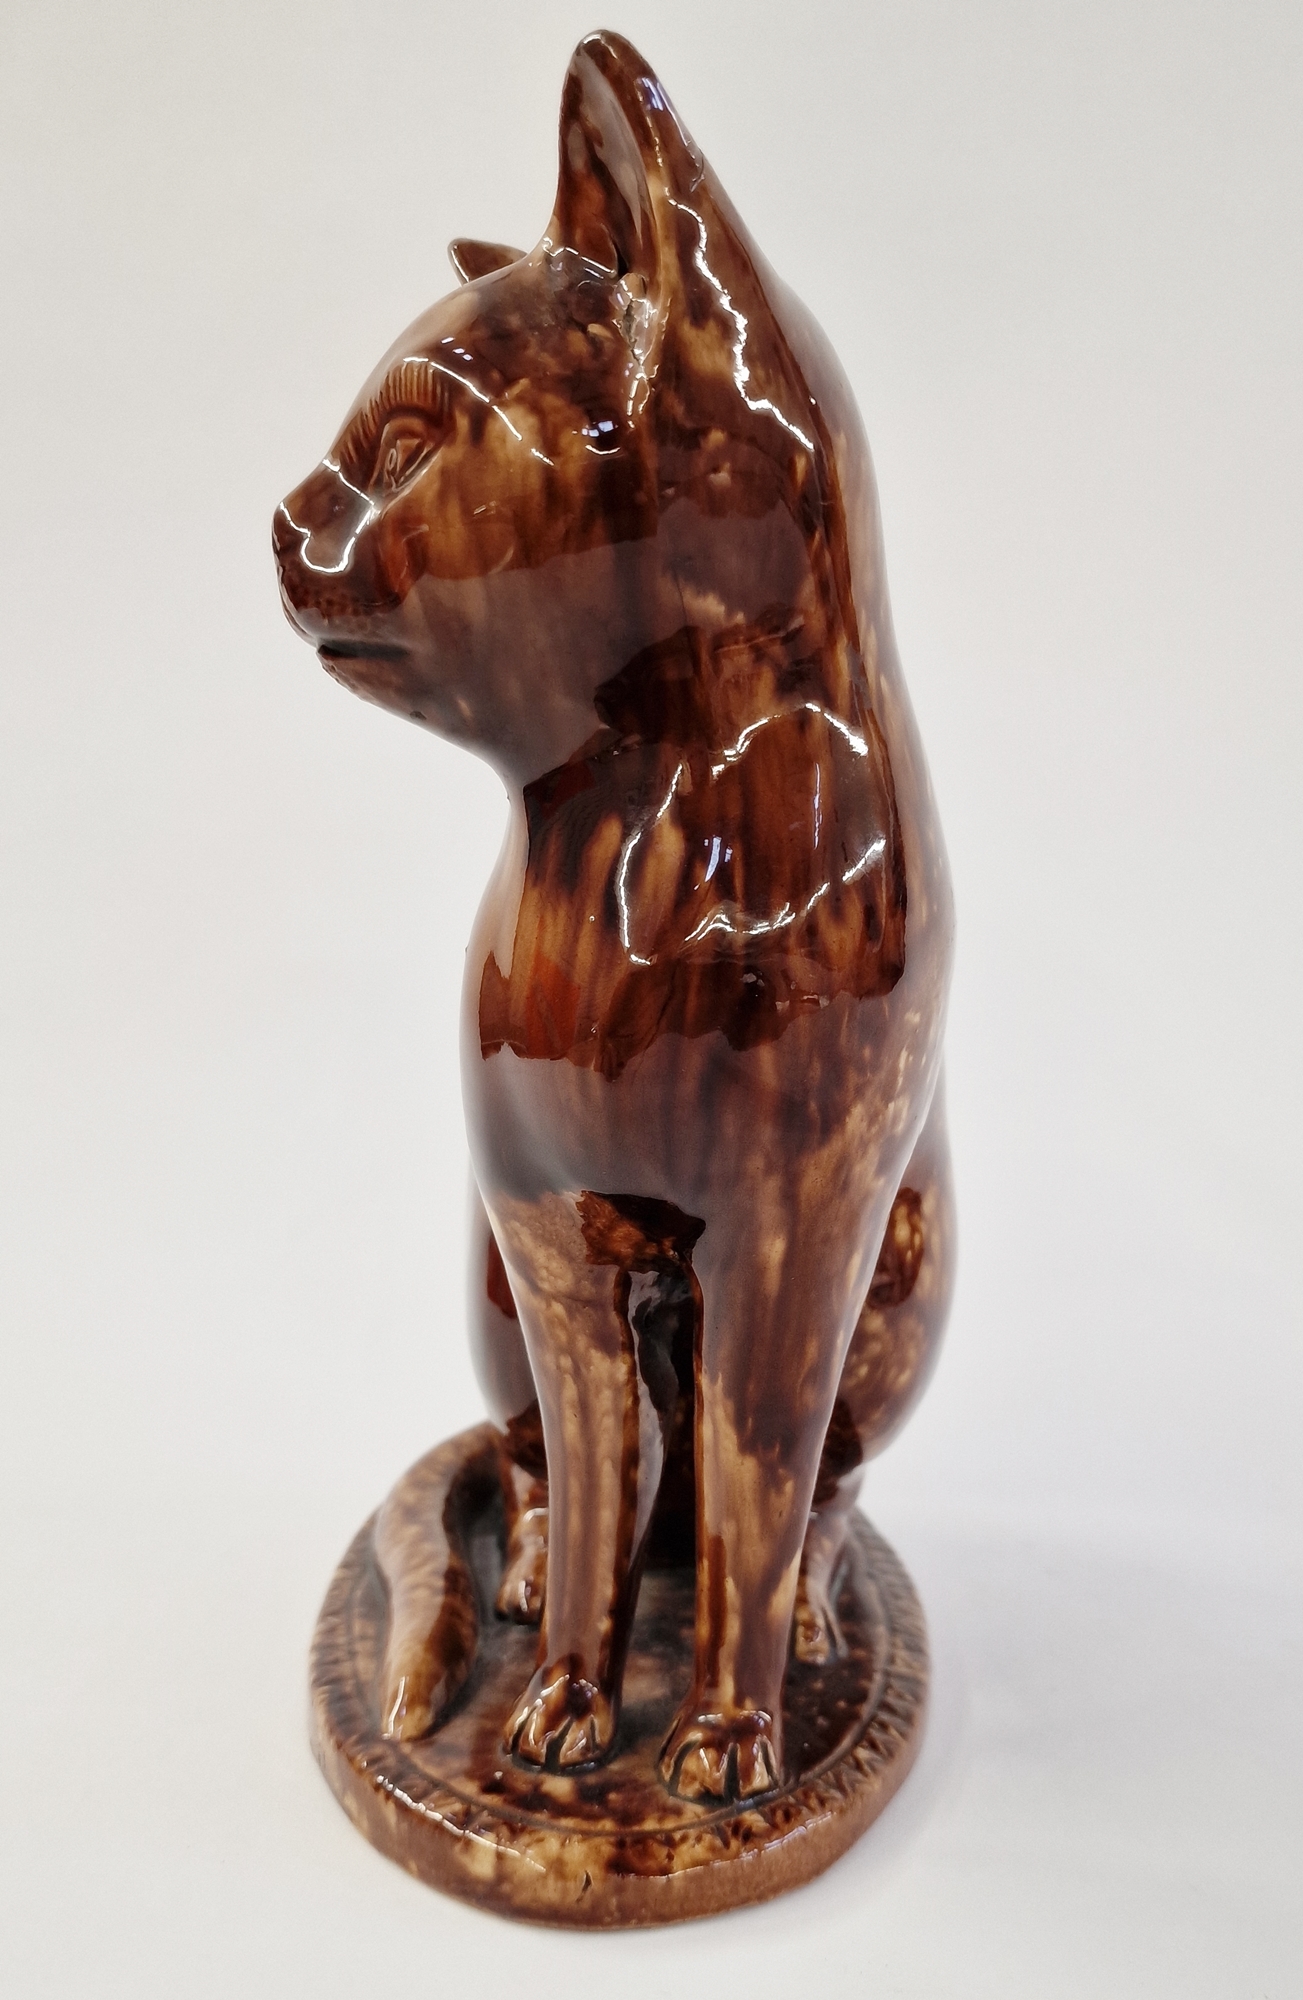 20th century pottery model of a cat, enriched in mottled brown Whieldon-style glaze, modelled seated - Image 2 of 4